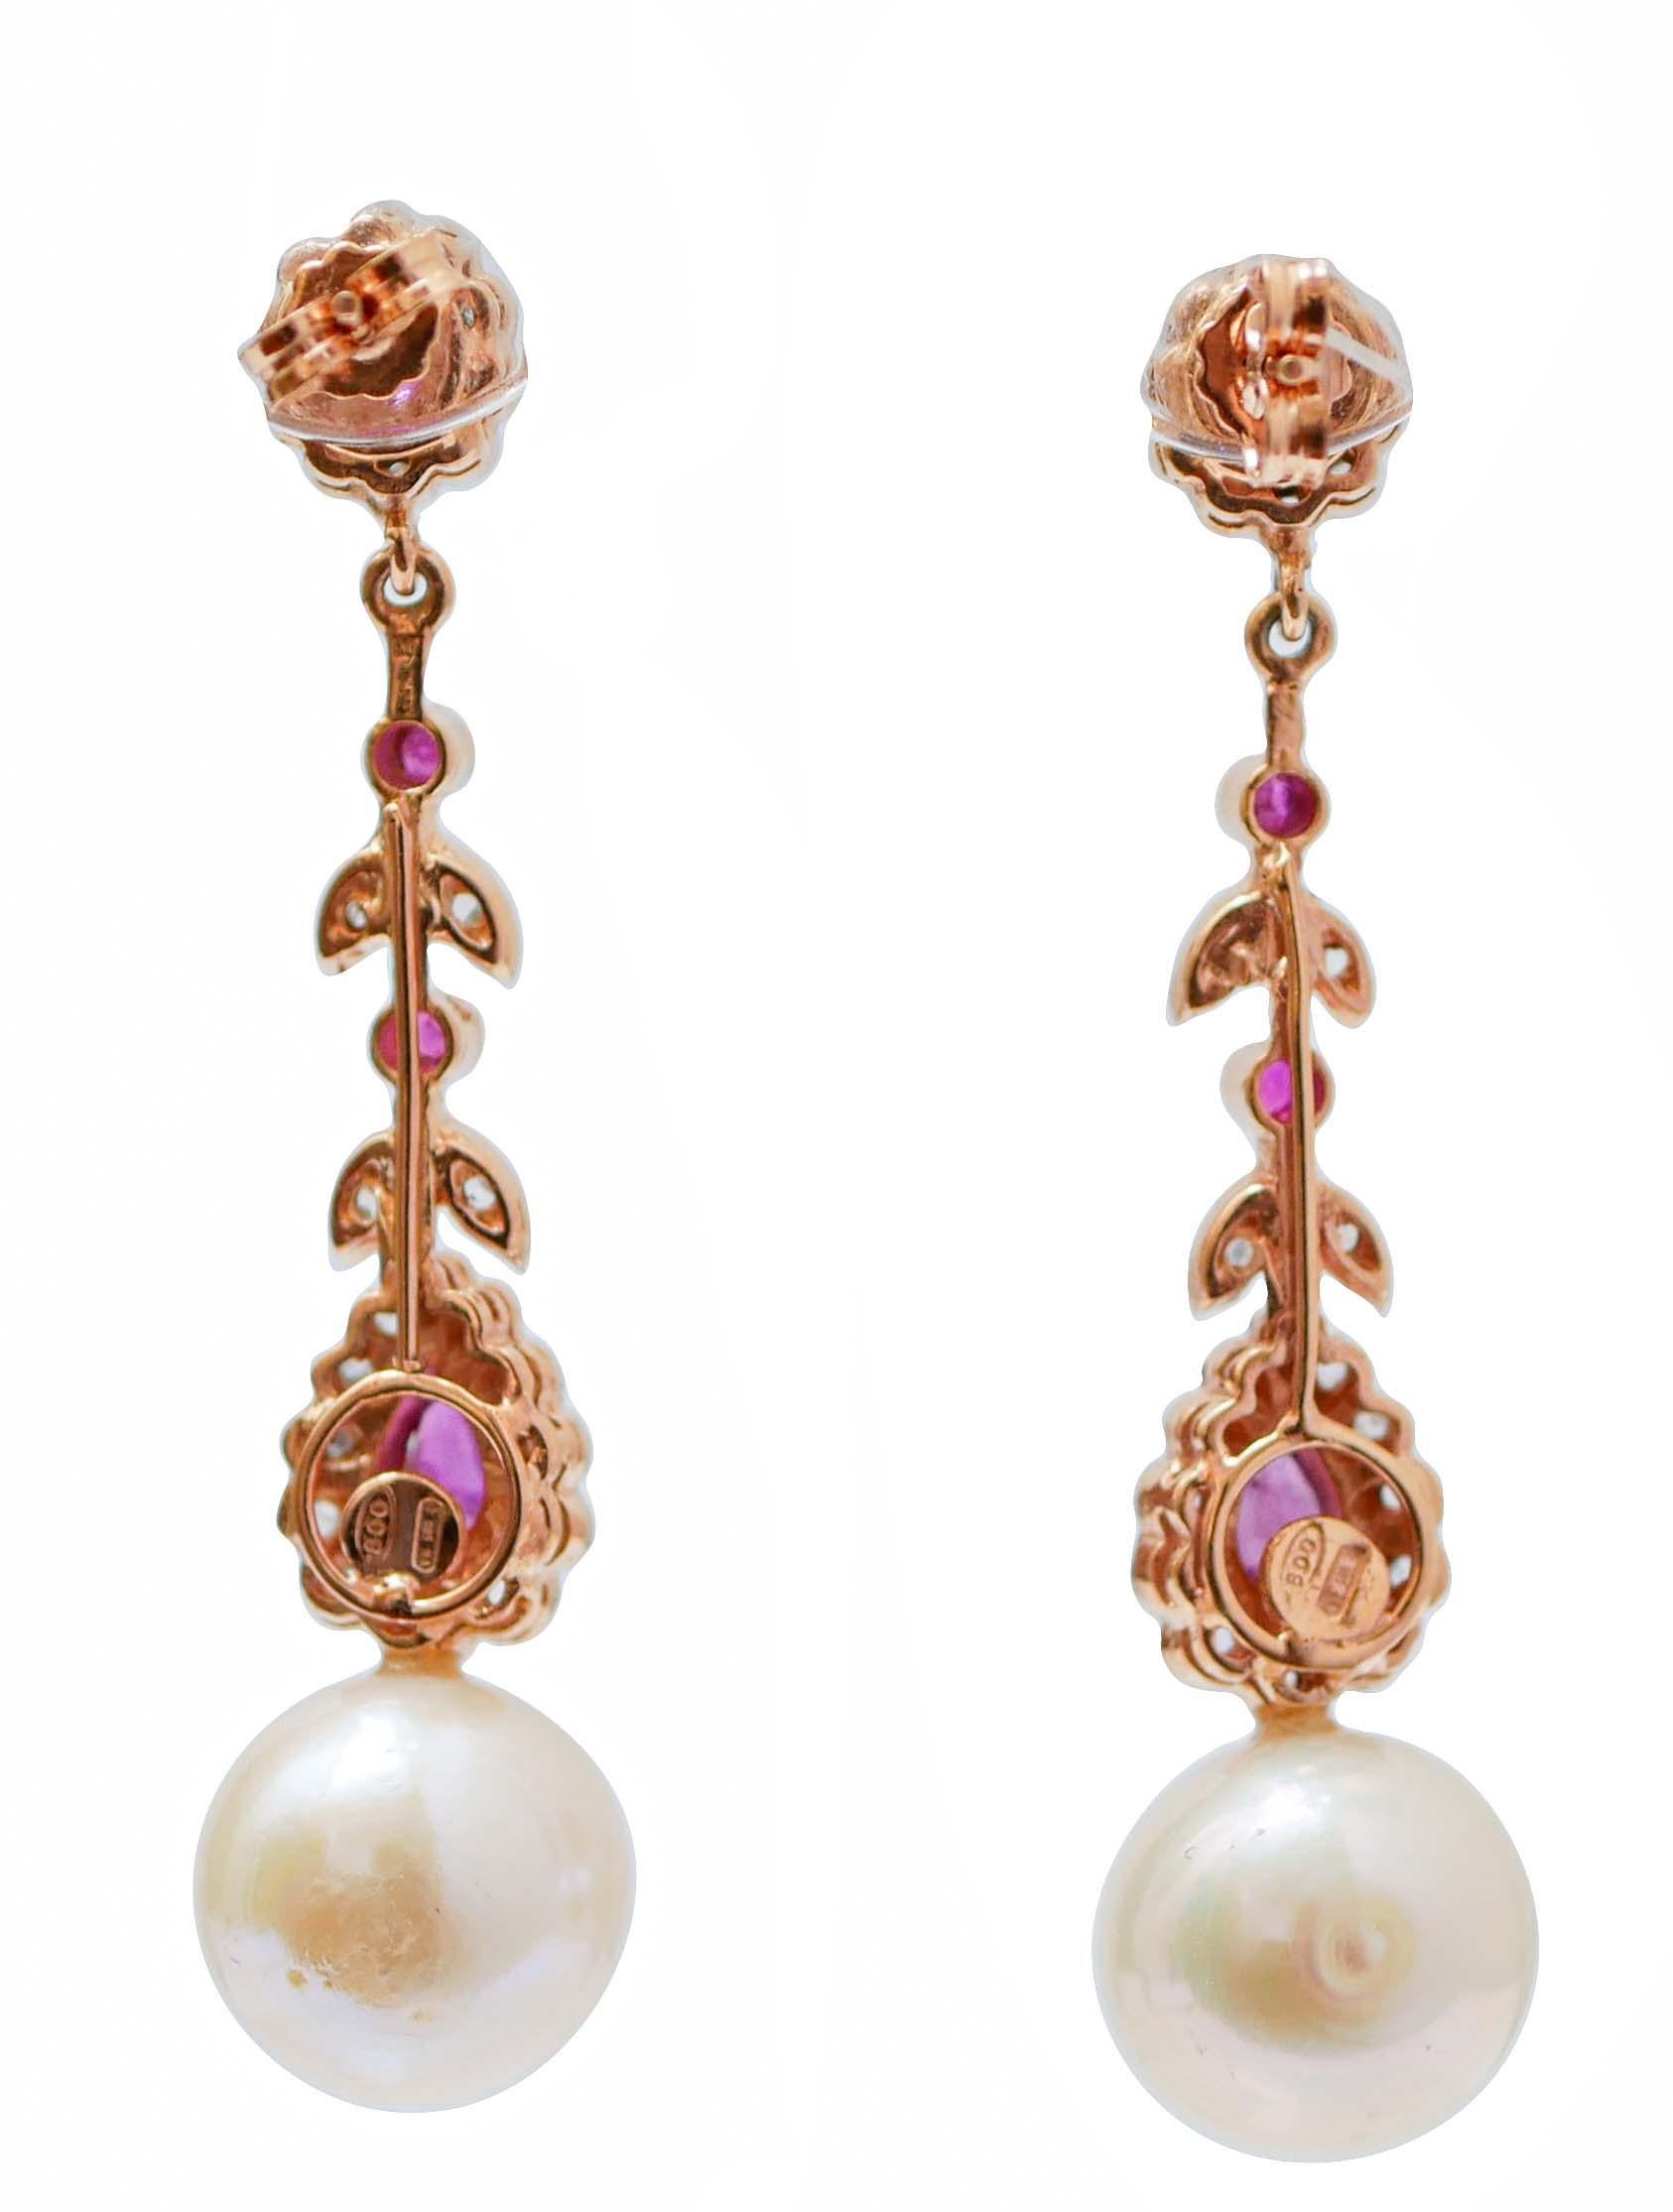 Retro White Pearls, Rubies, Diamonds, Rose Gold and Silver Dangle Earrings. For Sale